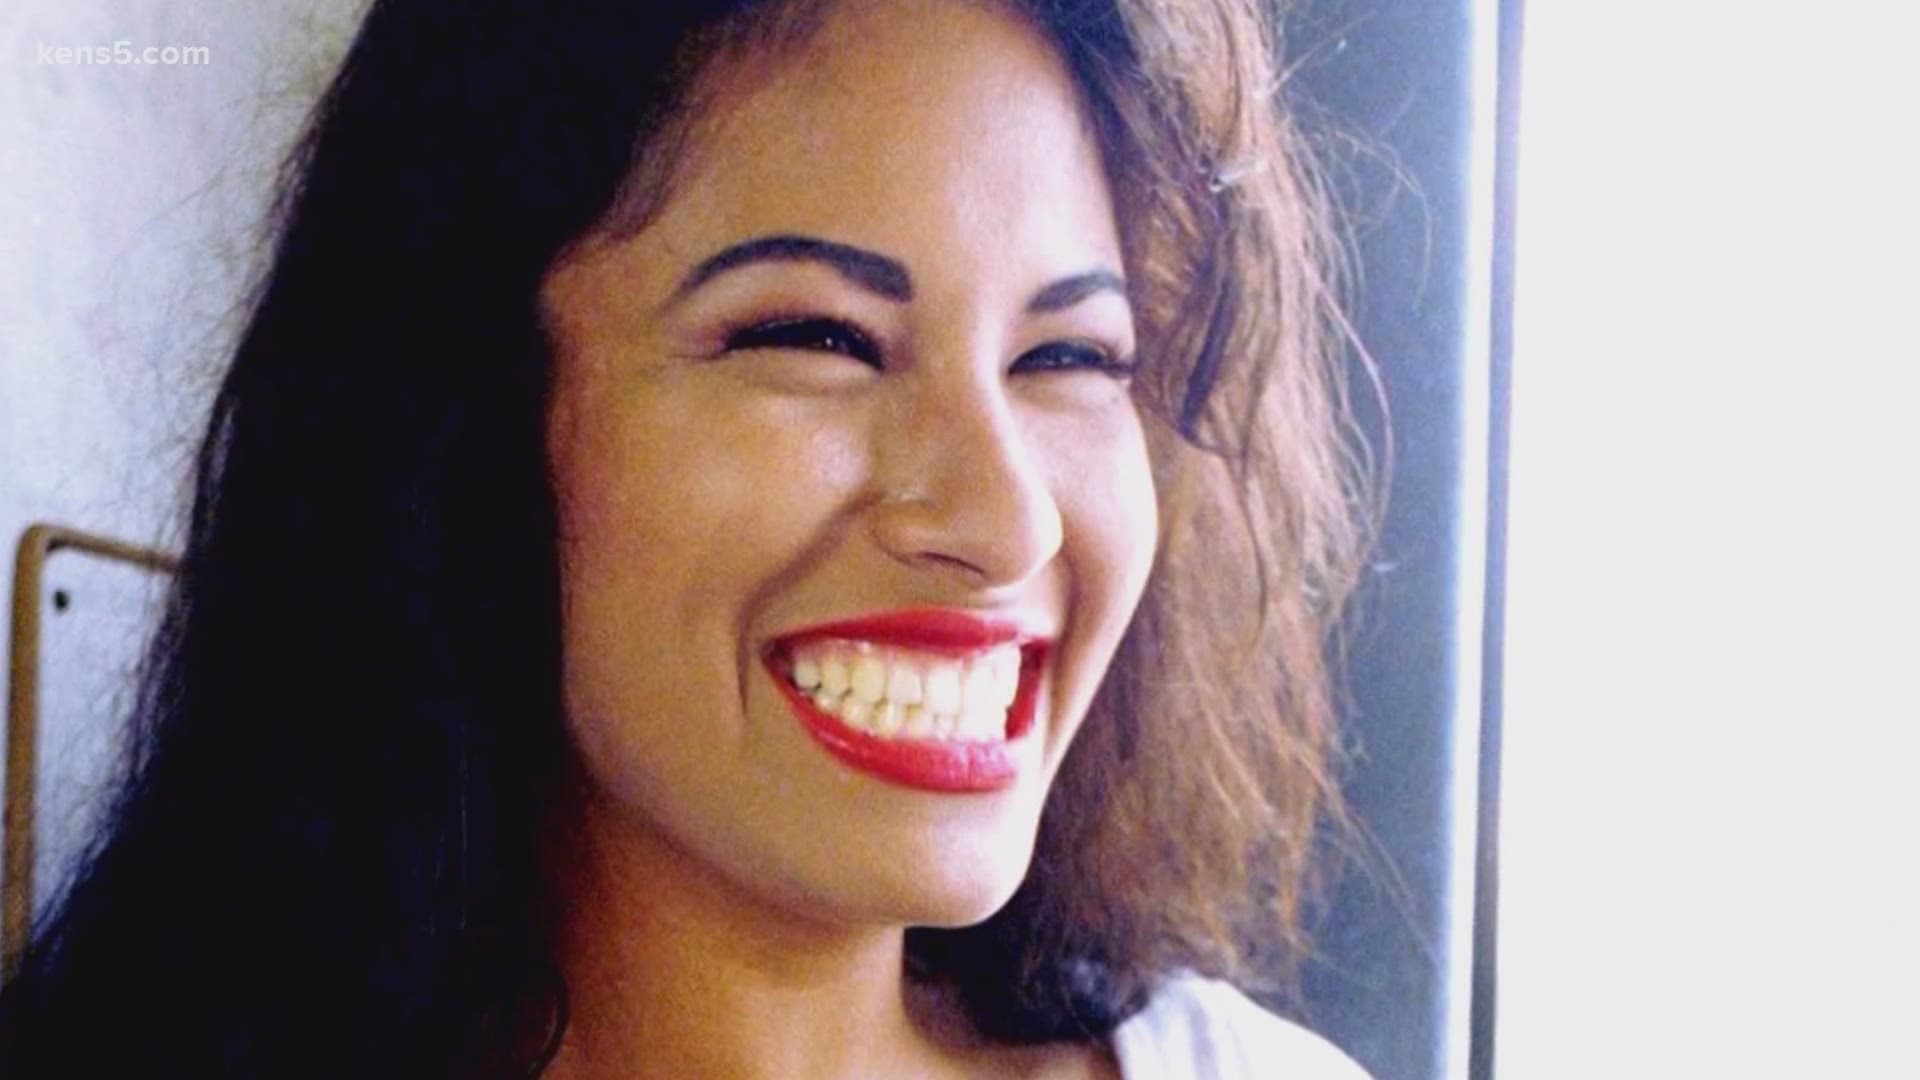 Digital Journalist Megan Ball shares more on Selena: A Mexican American Identity and Experience, a new course coming to UTSA this fall.